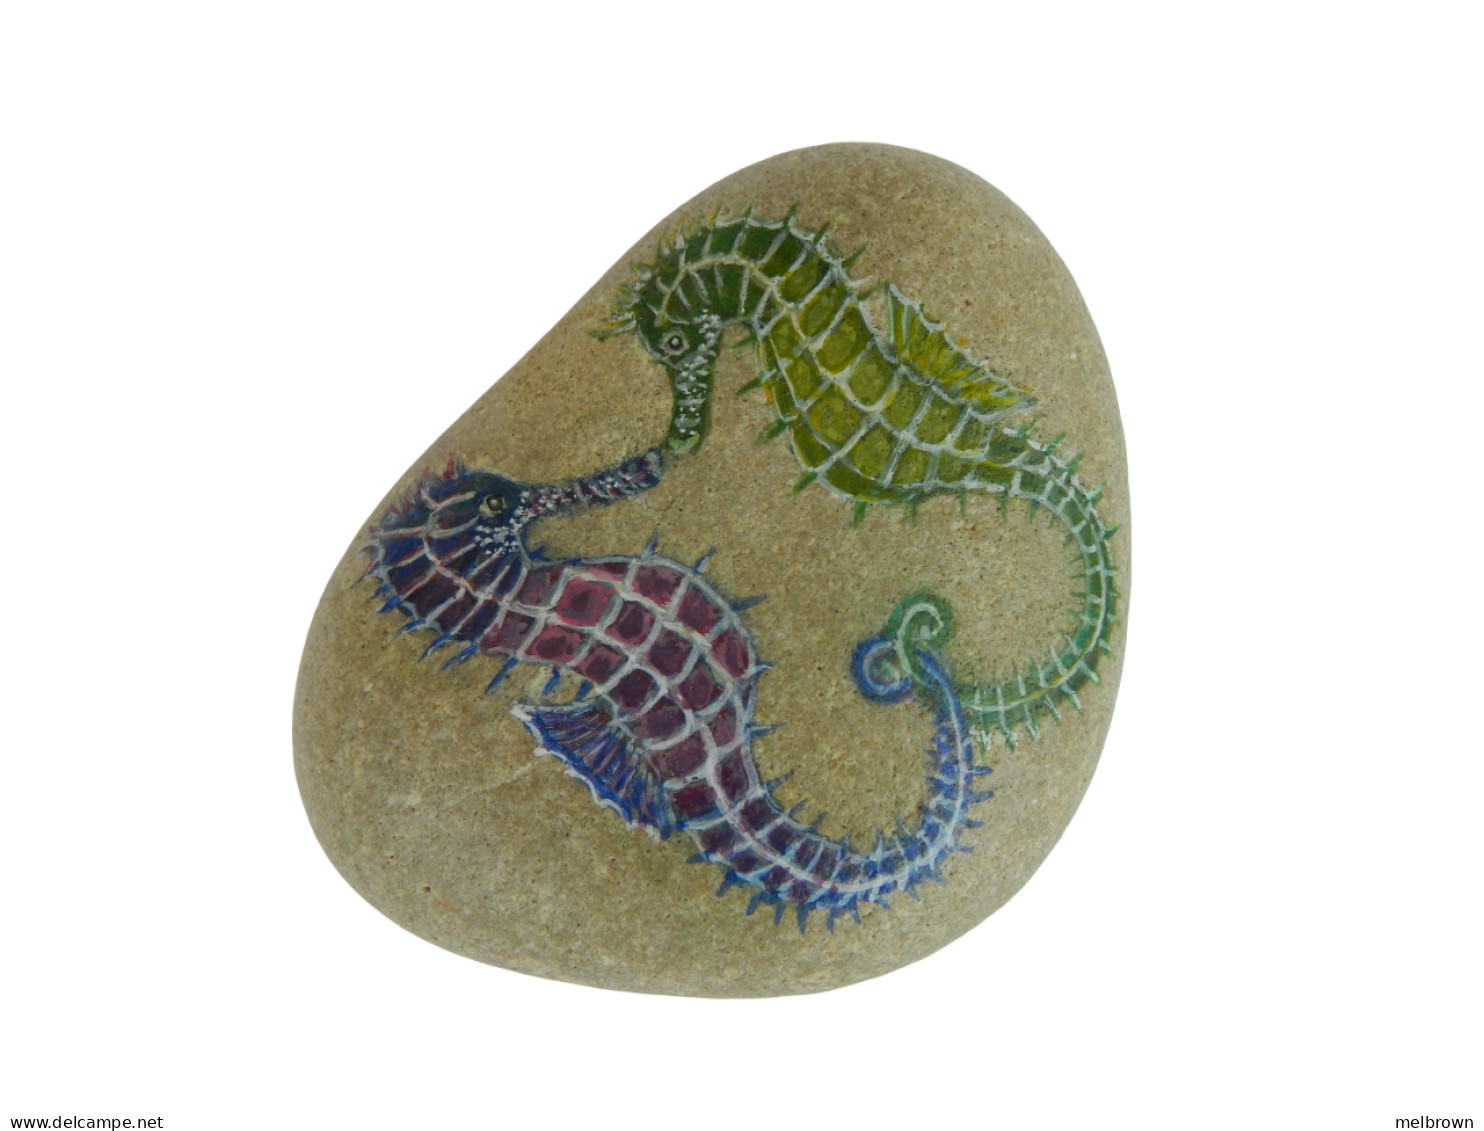 Seahorses Hand Painted On A Heart-Shaped Beach Stone Paperweight - Dieren